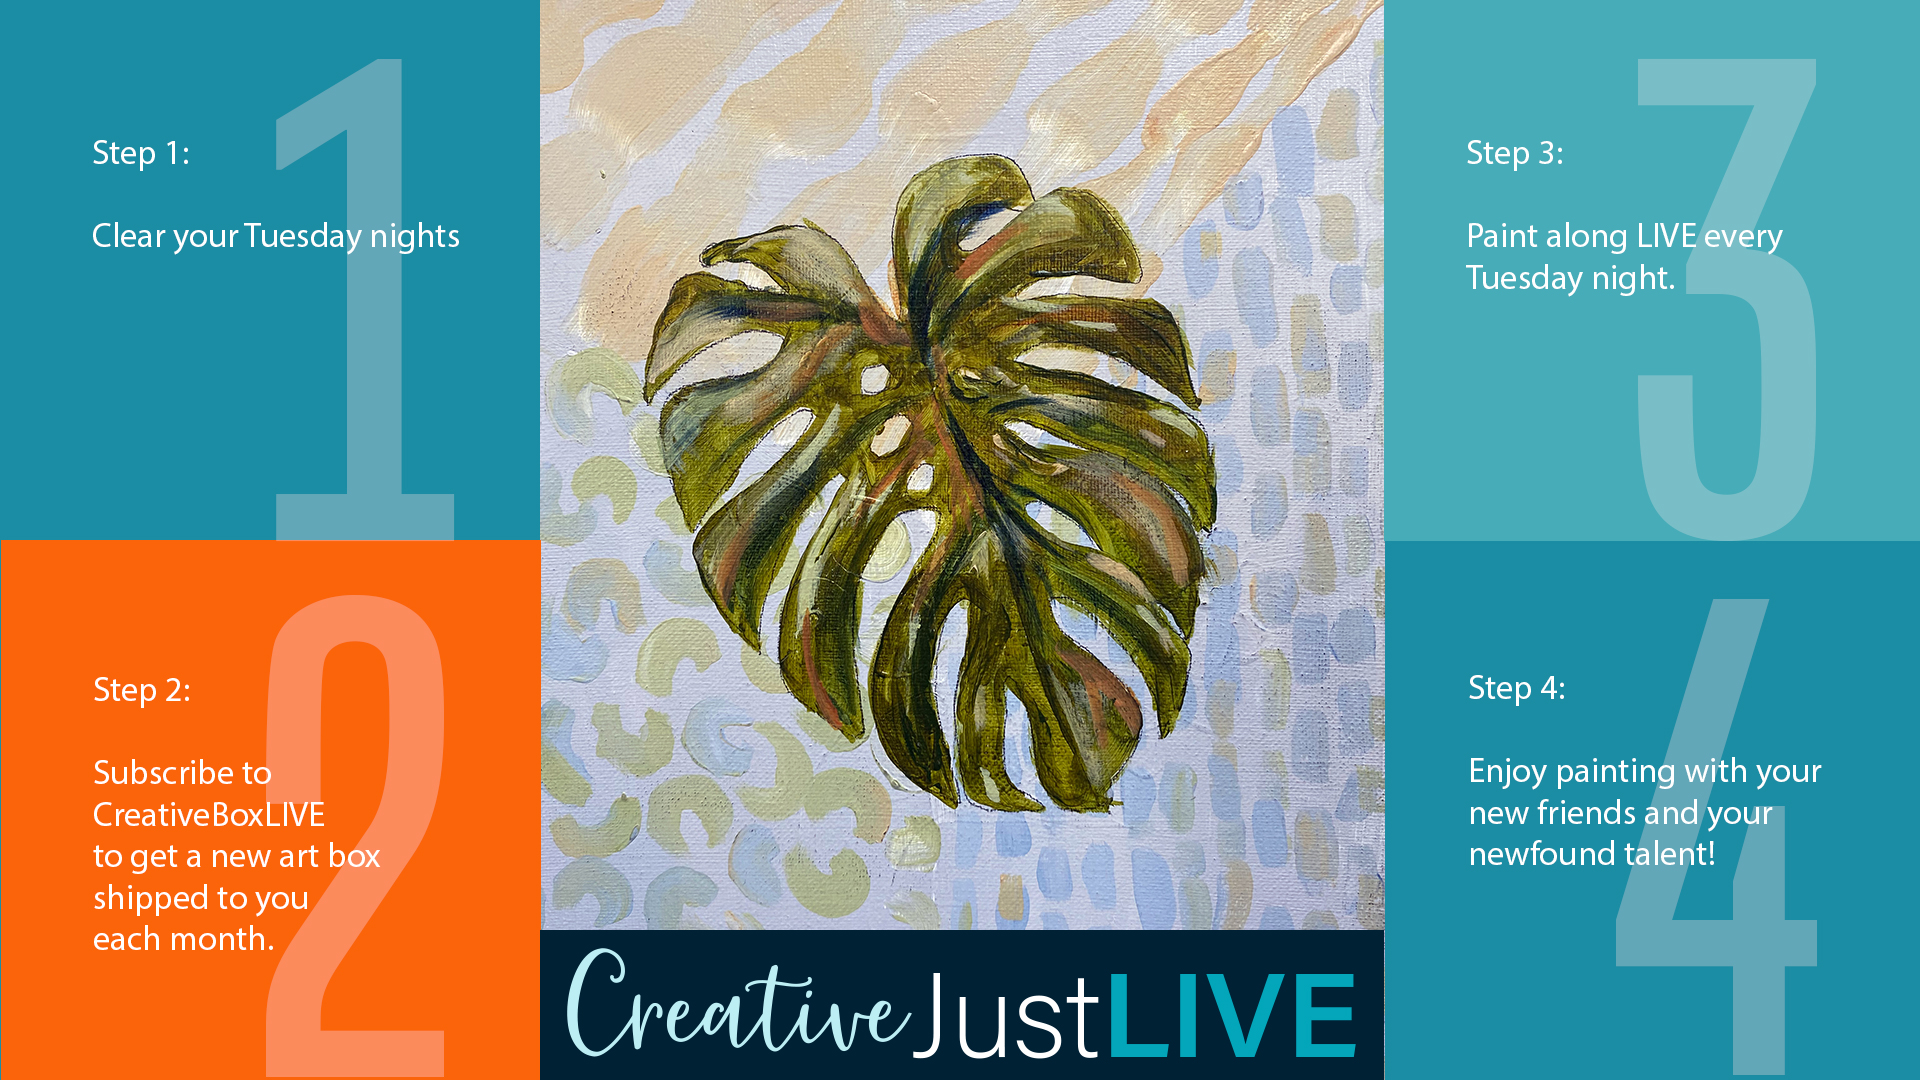 Monstera FB from Creatively Uncorked http://creativelyuncorked.com/